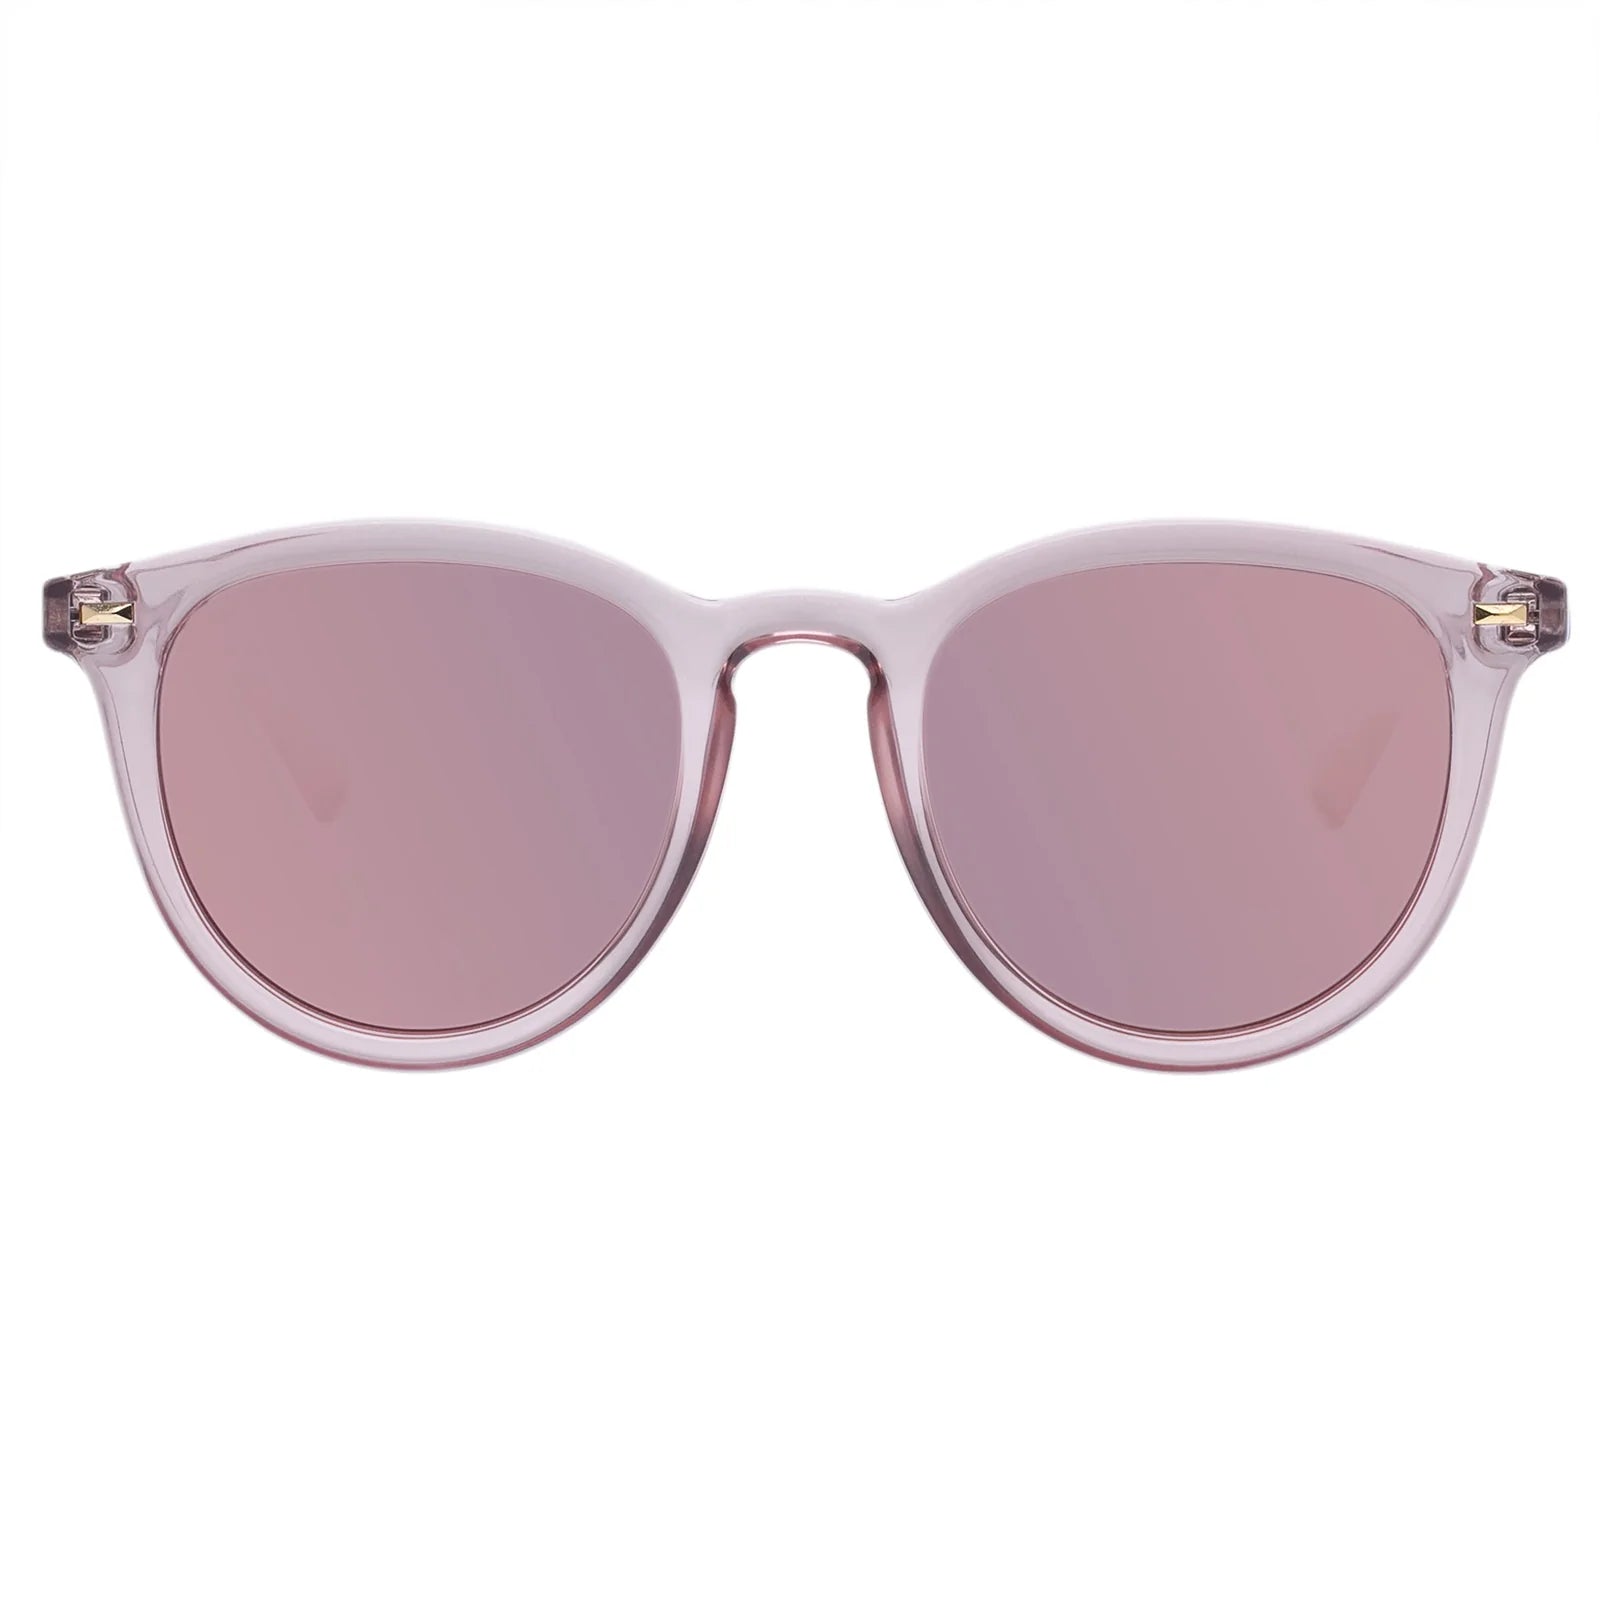 LE SPECS - FIRE STARTER SUNGLASSES IN ROSEWATER